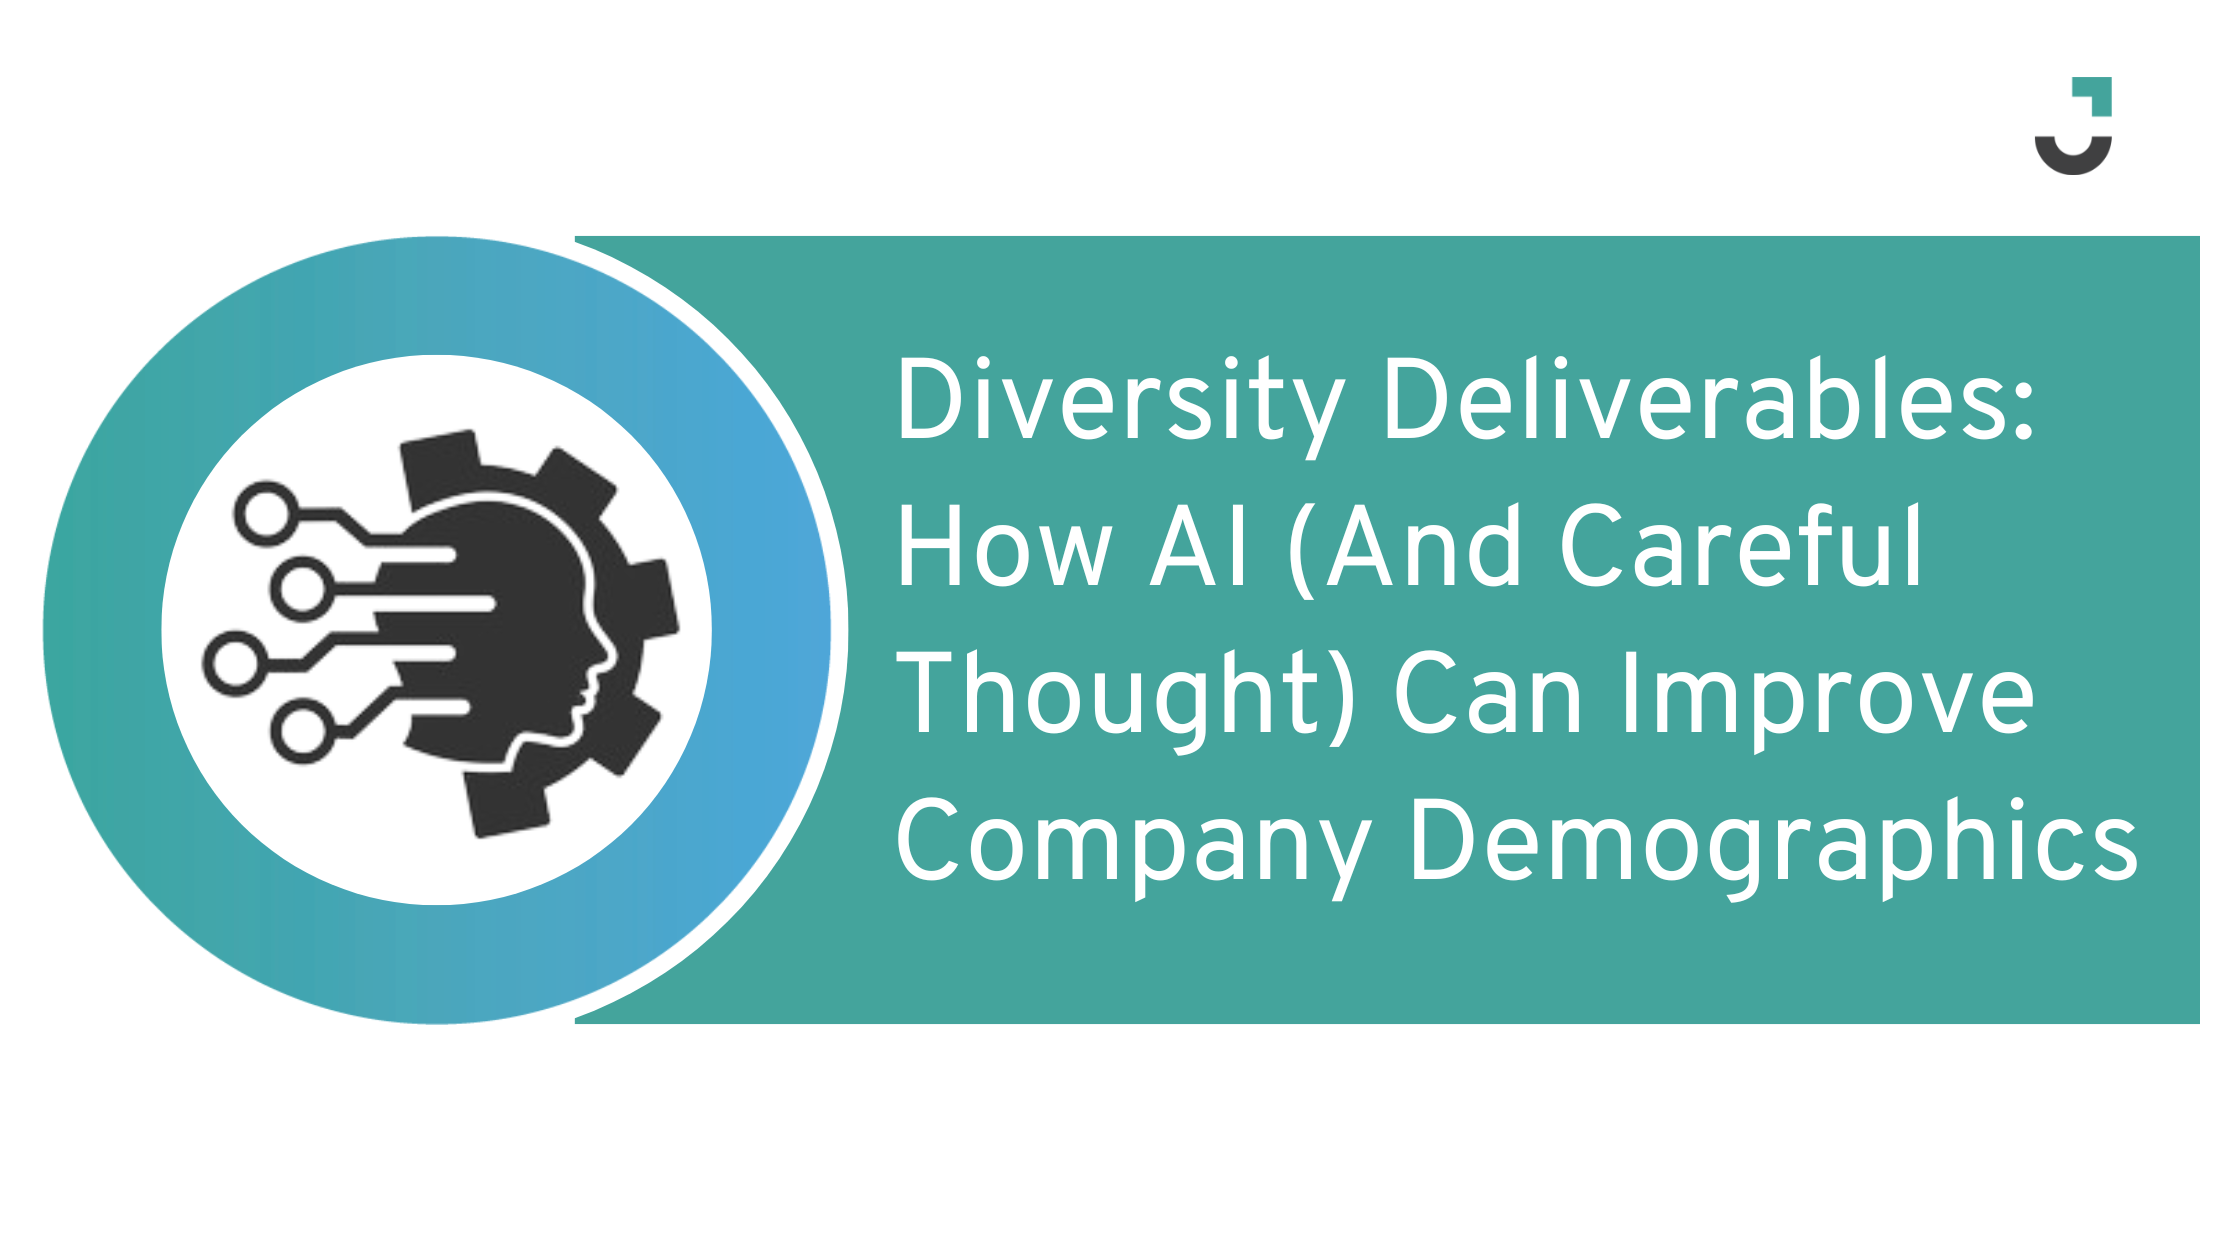 Diversity Deliverables: How AI (And Careful Thought) Can Improve Company Demographics